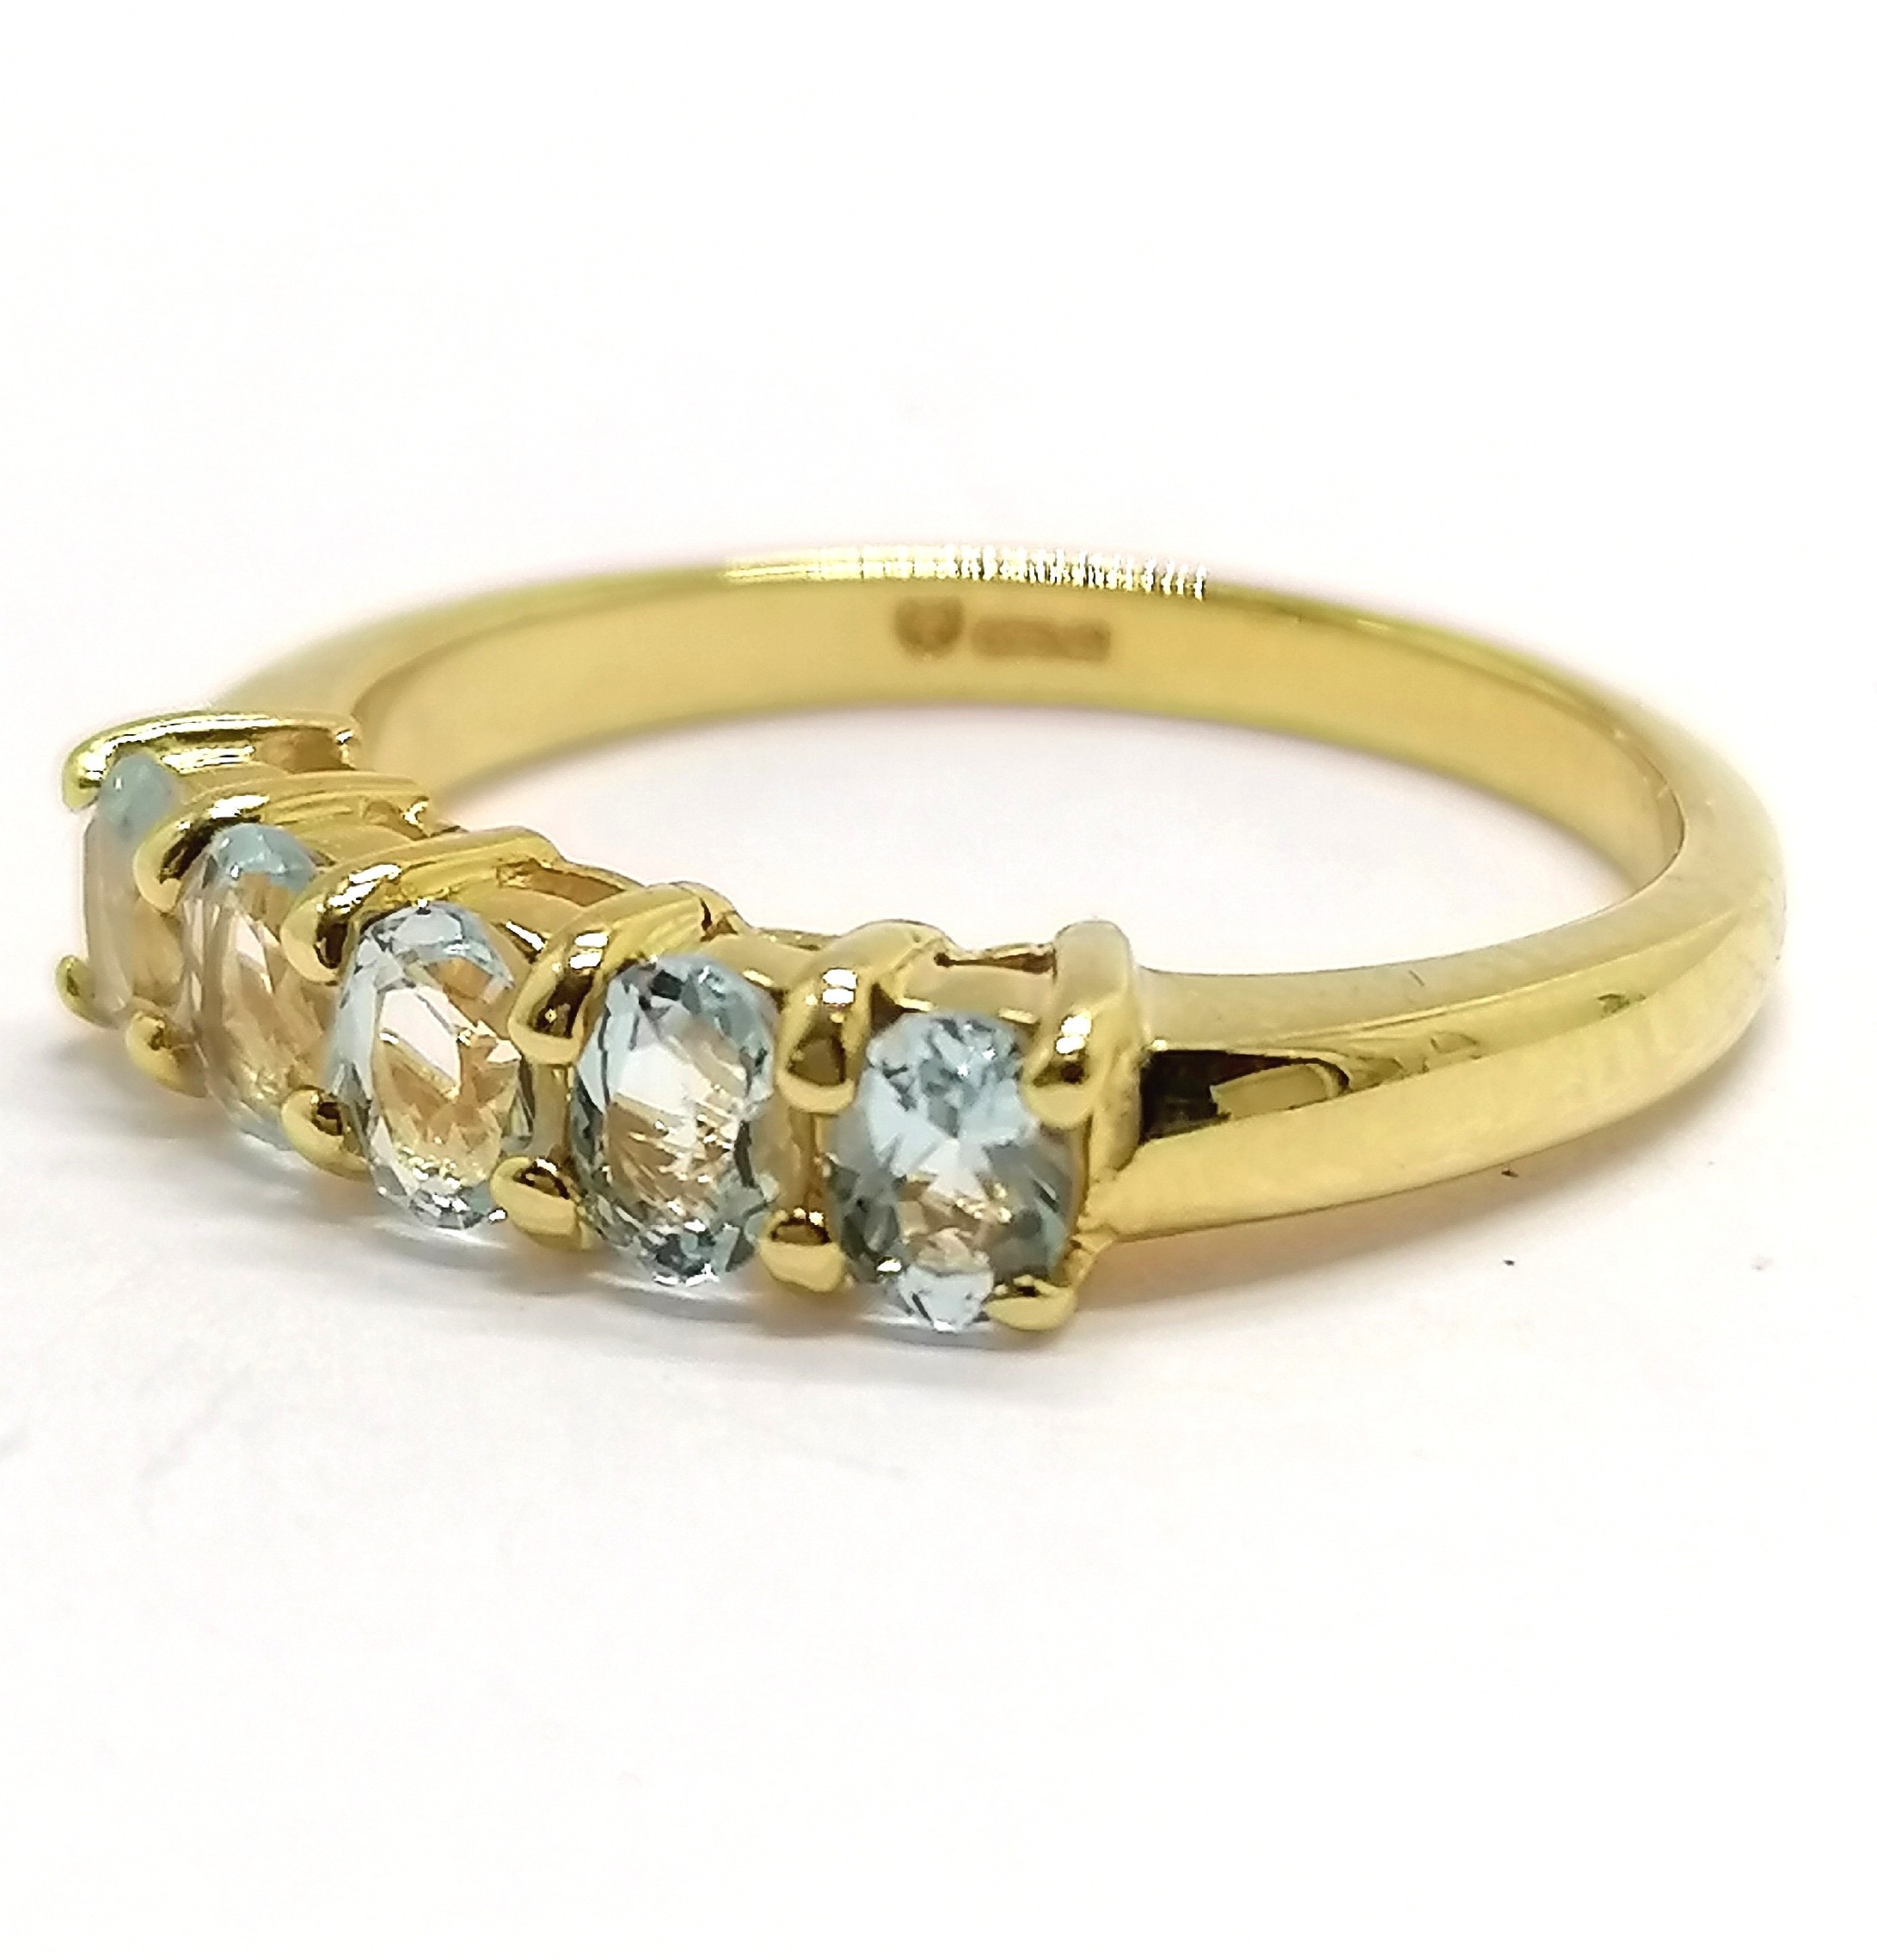 9ct hallmarked gold 5 stone blue topaz ring - size P½ & 3g total weight - Image 2 of 2